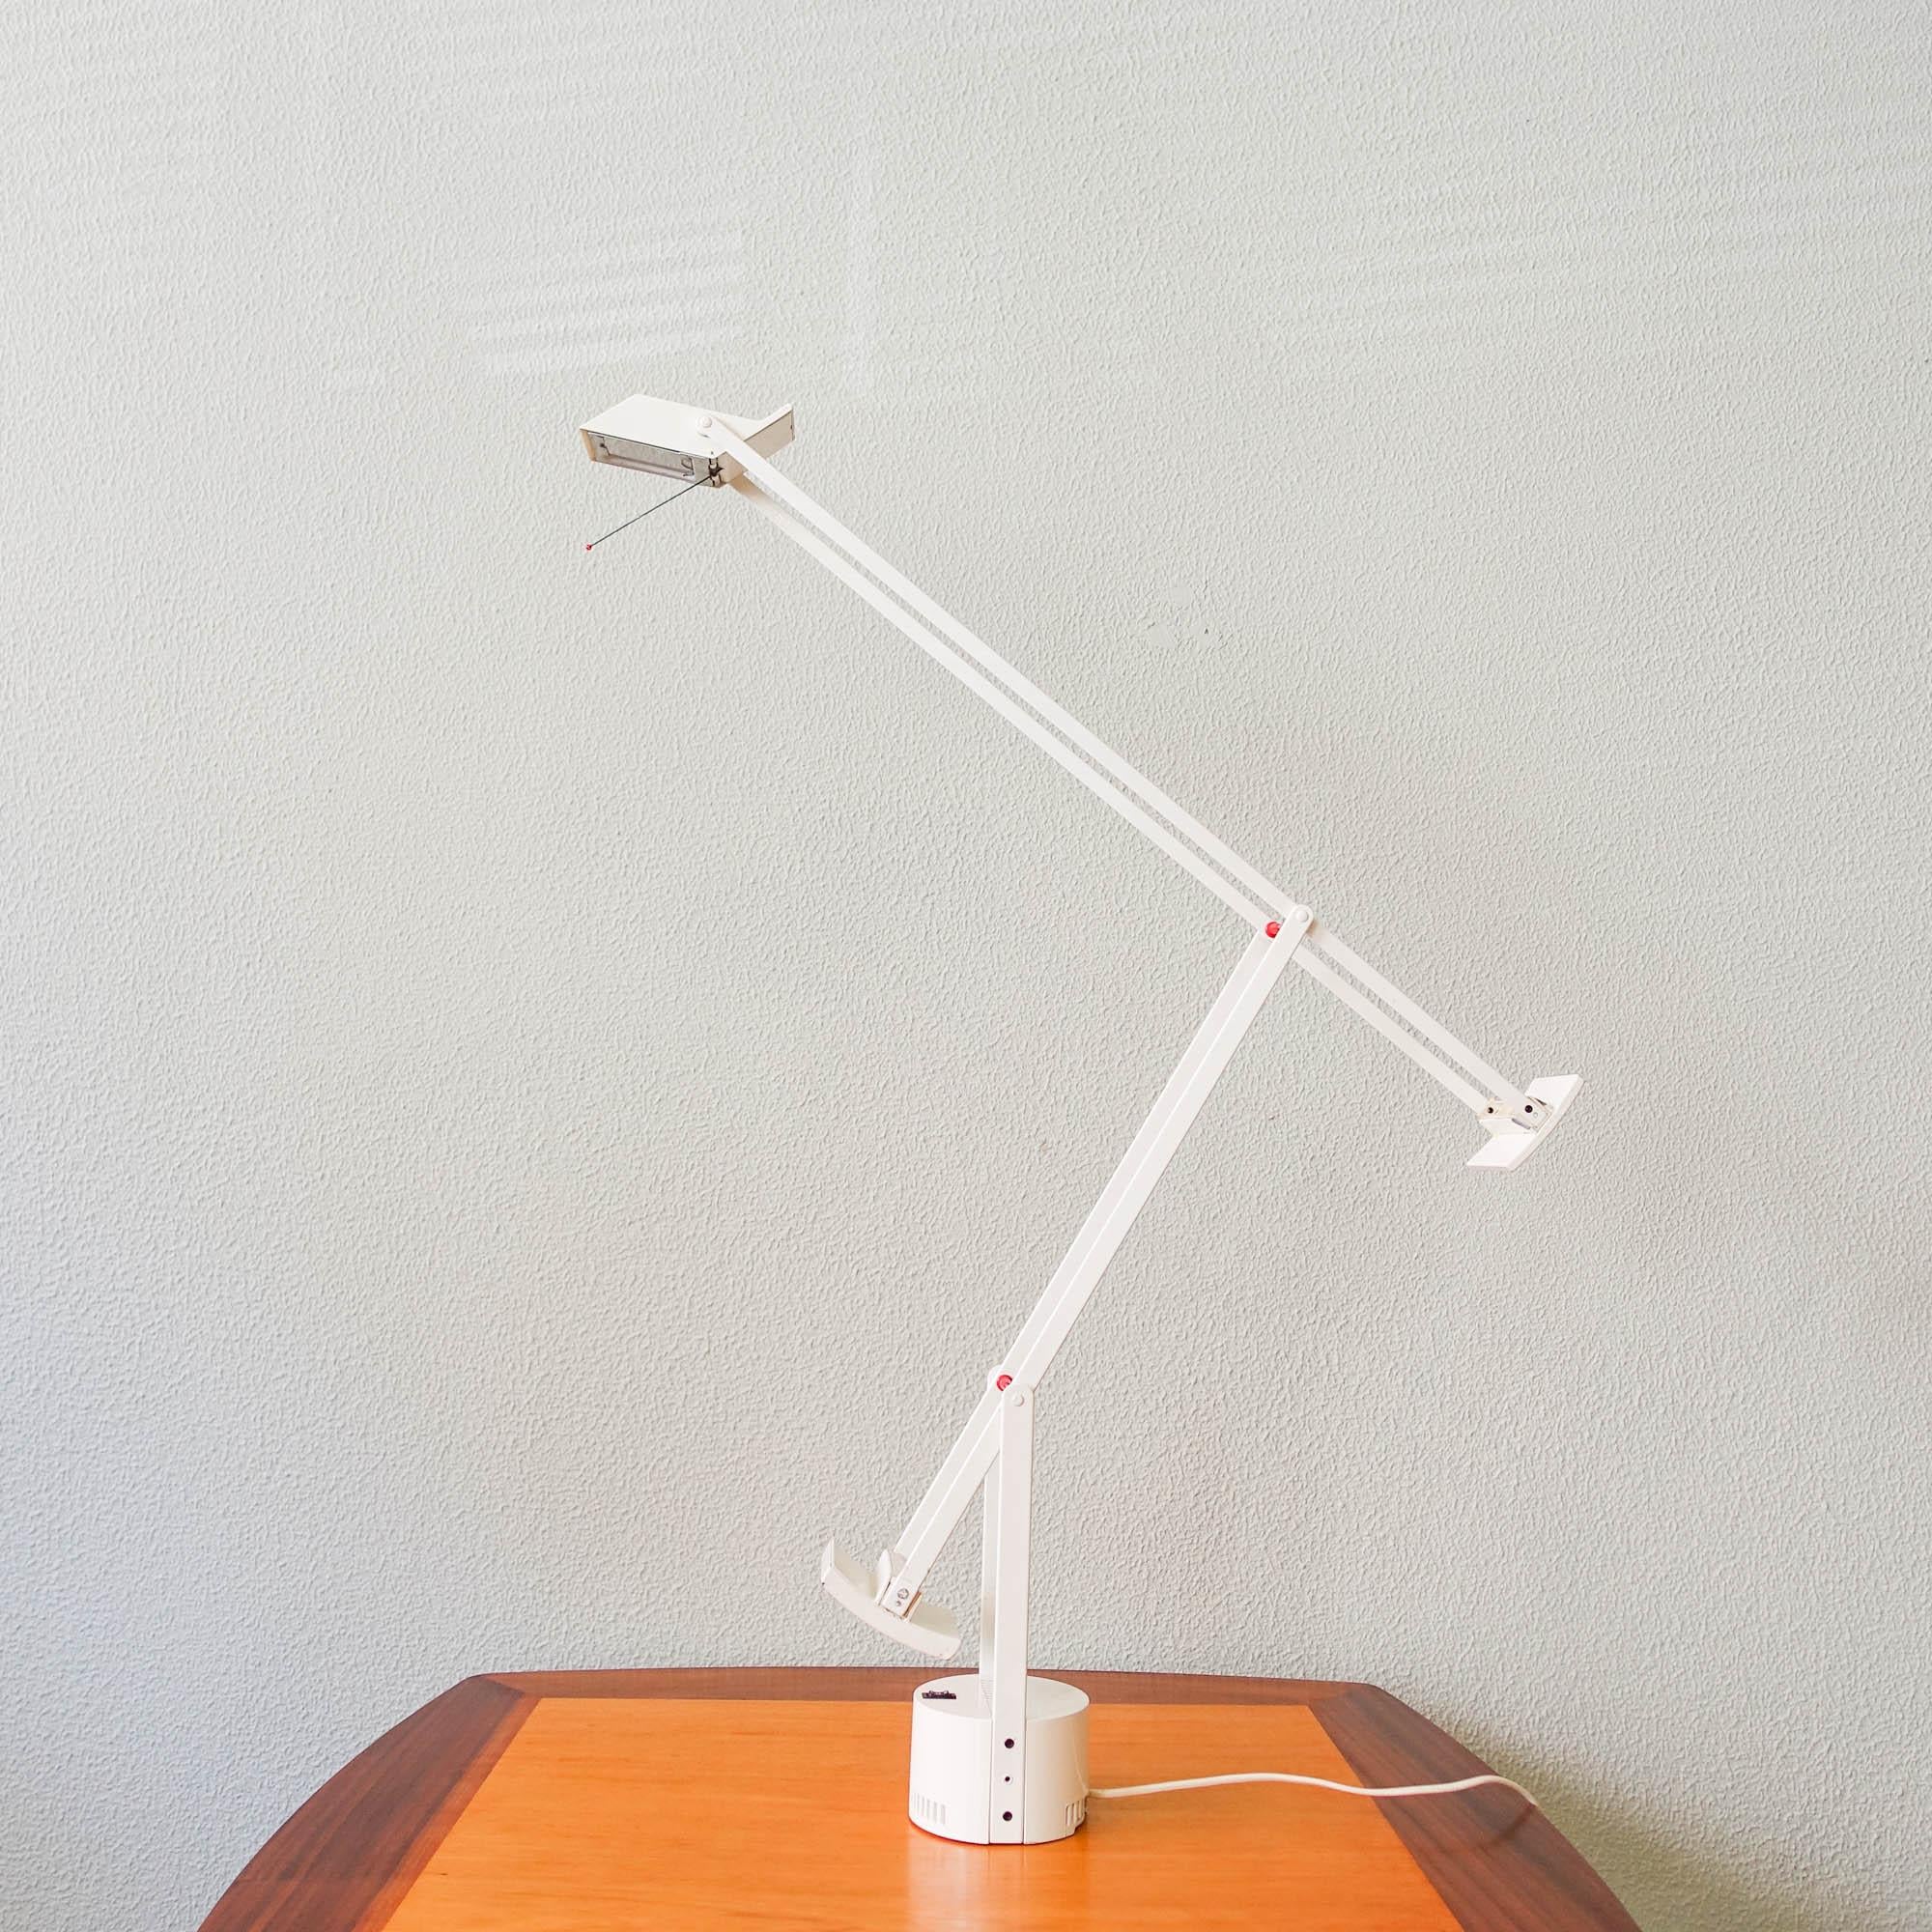 This table lamp, model Tizio, was designed by Richard Sapper for Artemide, in Italy, in 1972. Introduced in 1972, the lamp is built with two counterweights allowing the user to direct the light at will.
The lamp adjusts with a pull or push of the